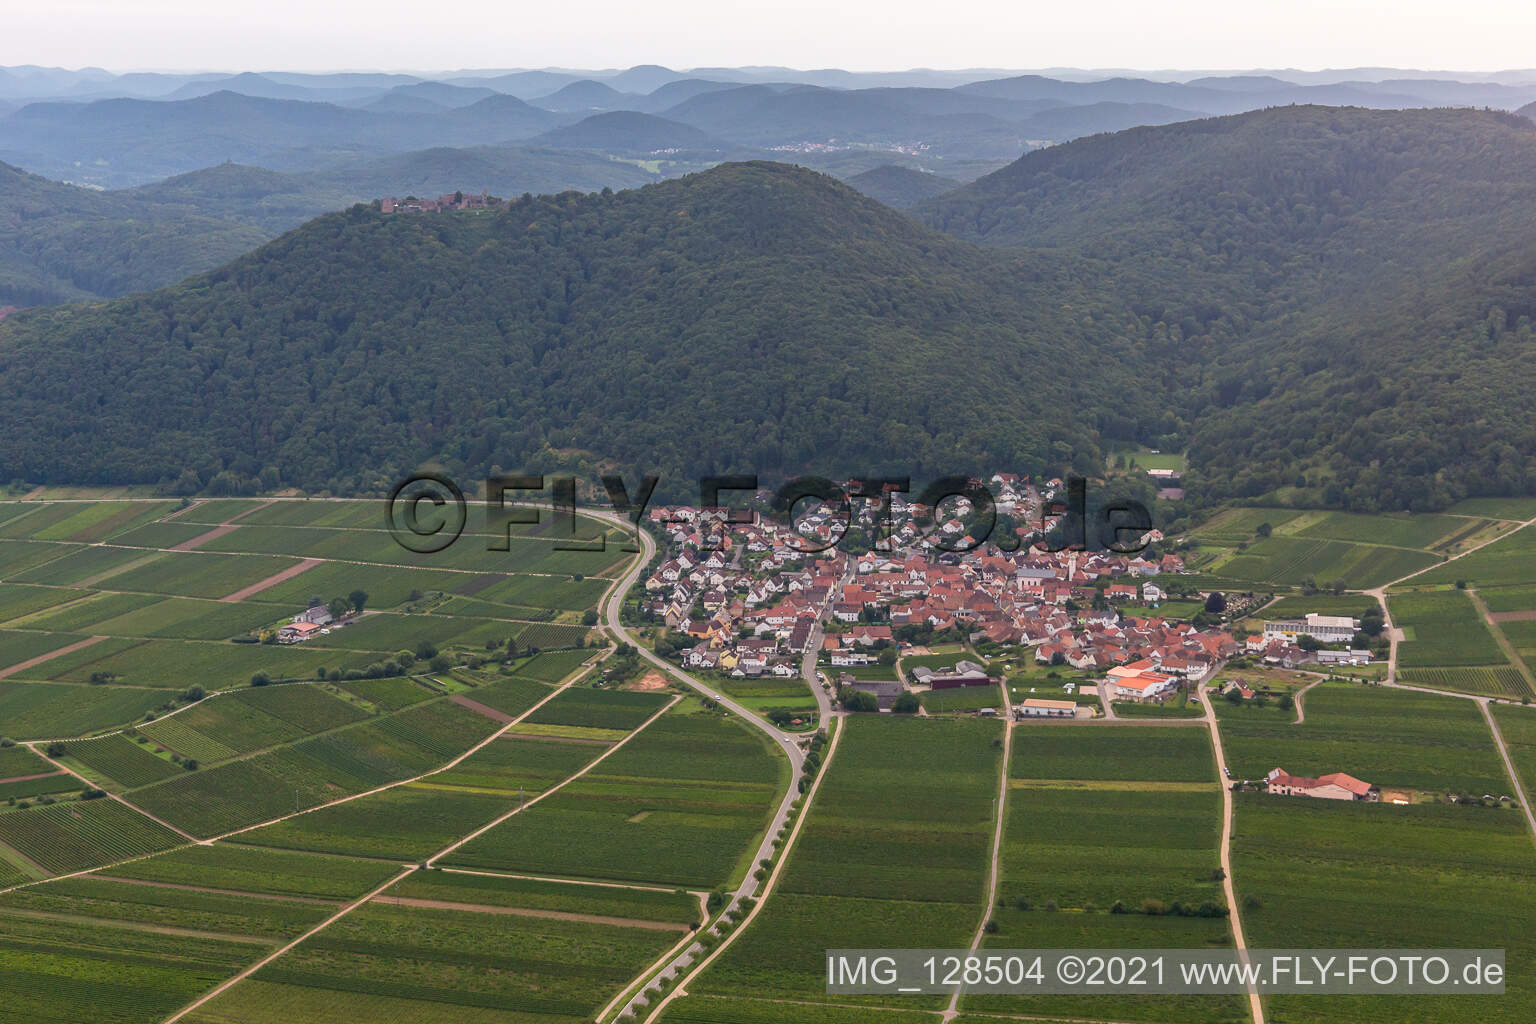 Eschbach in the state Rhineland-Palatinate, Germany seen from a drone